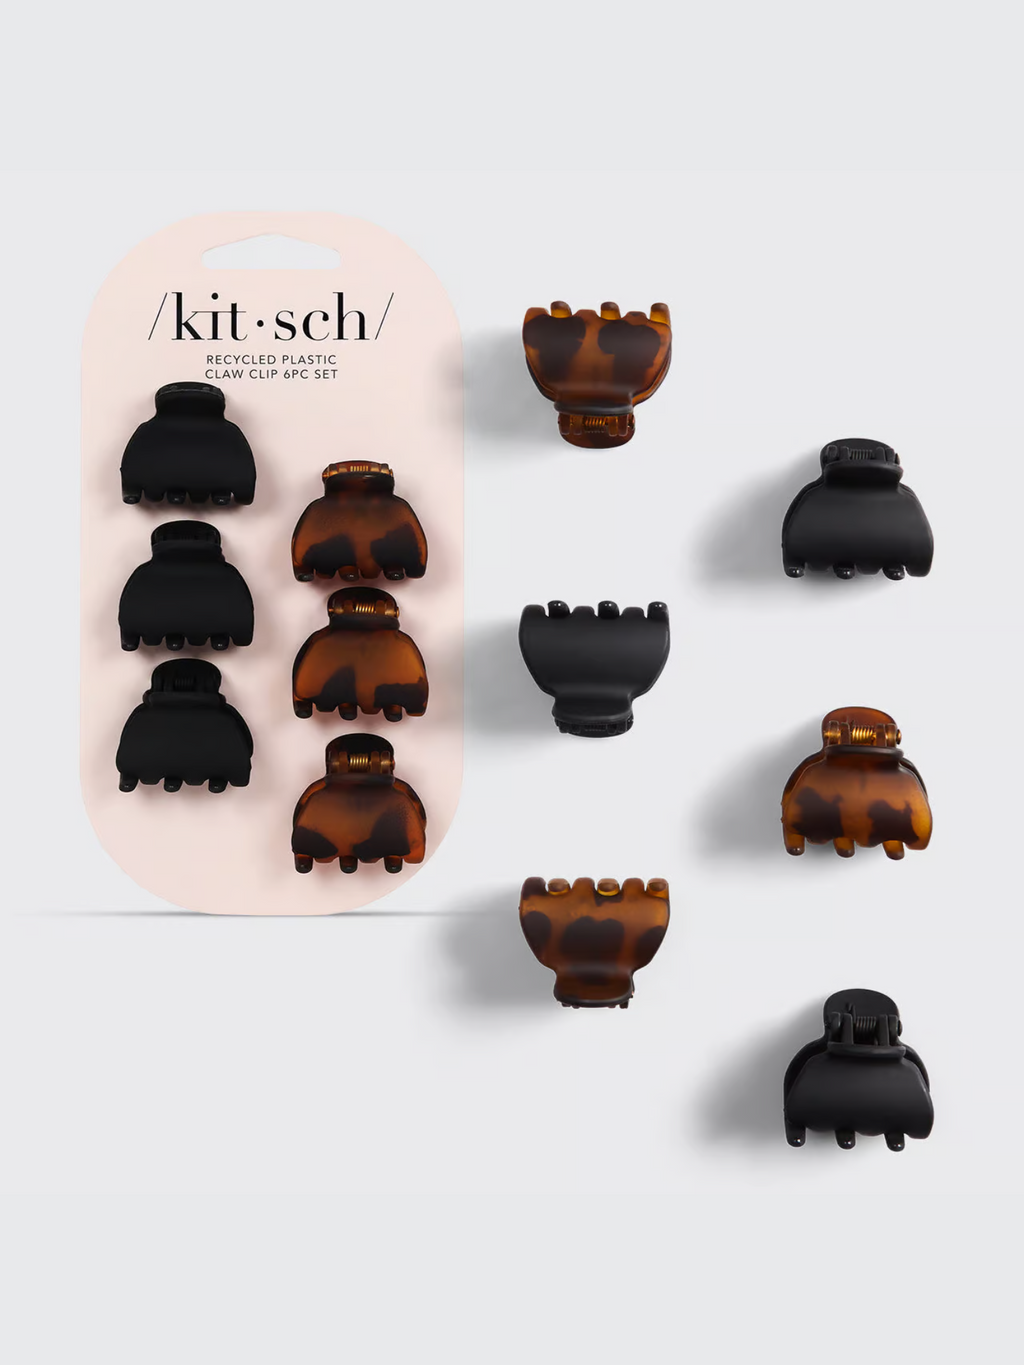 Kitsch X-Small Recycled Plastic Mini Classic Claw Clips 6pc